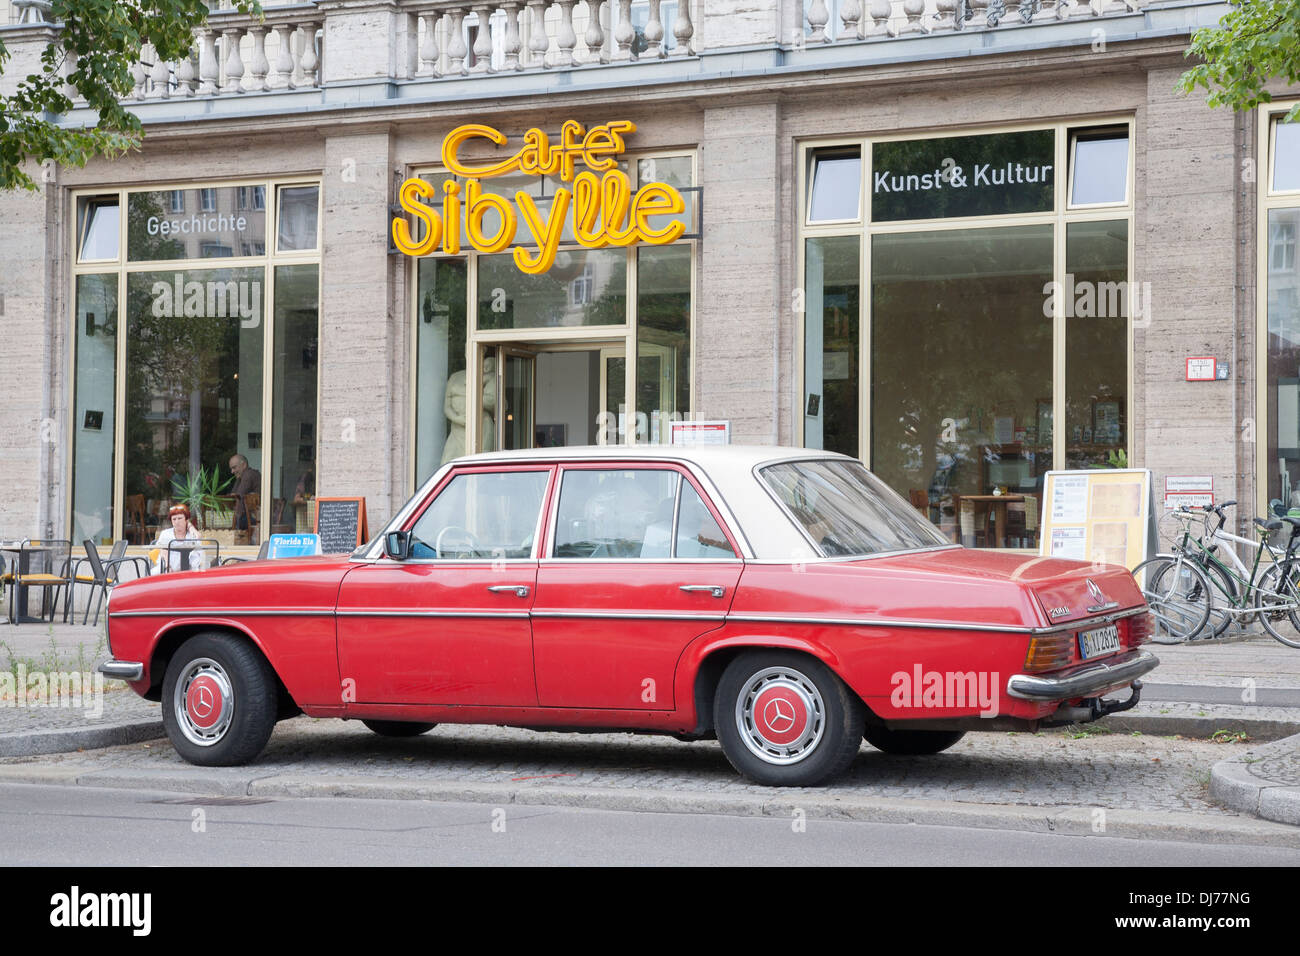 Cafe Sibylle, Karl Marx Allee Street, Berlin; Germany with Old Red Mercedes Car Stock Photo